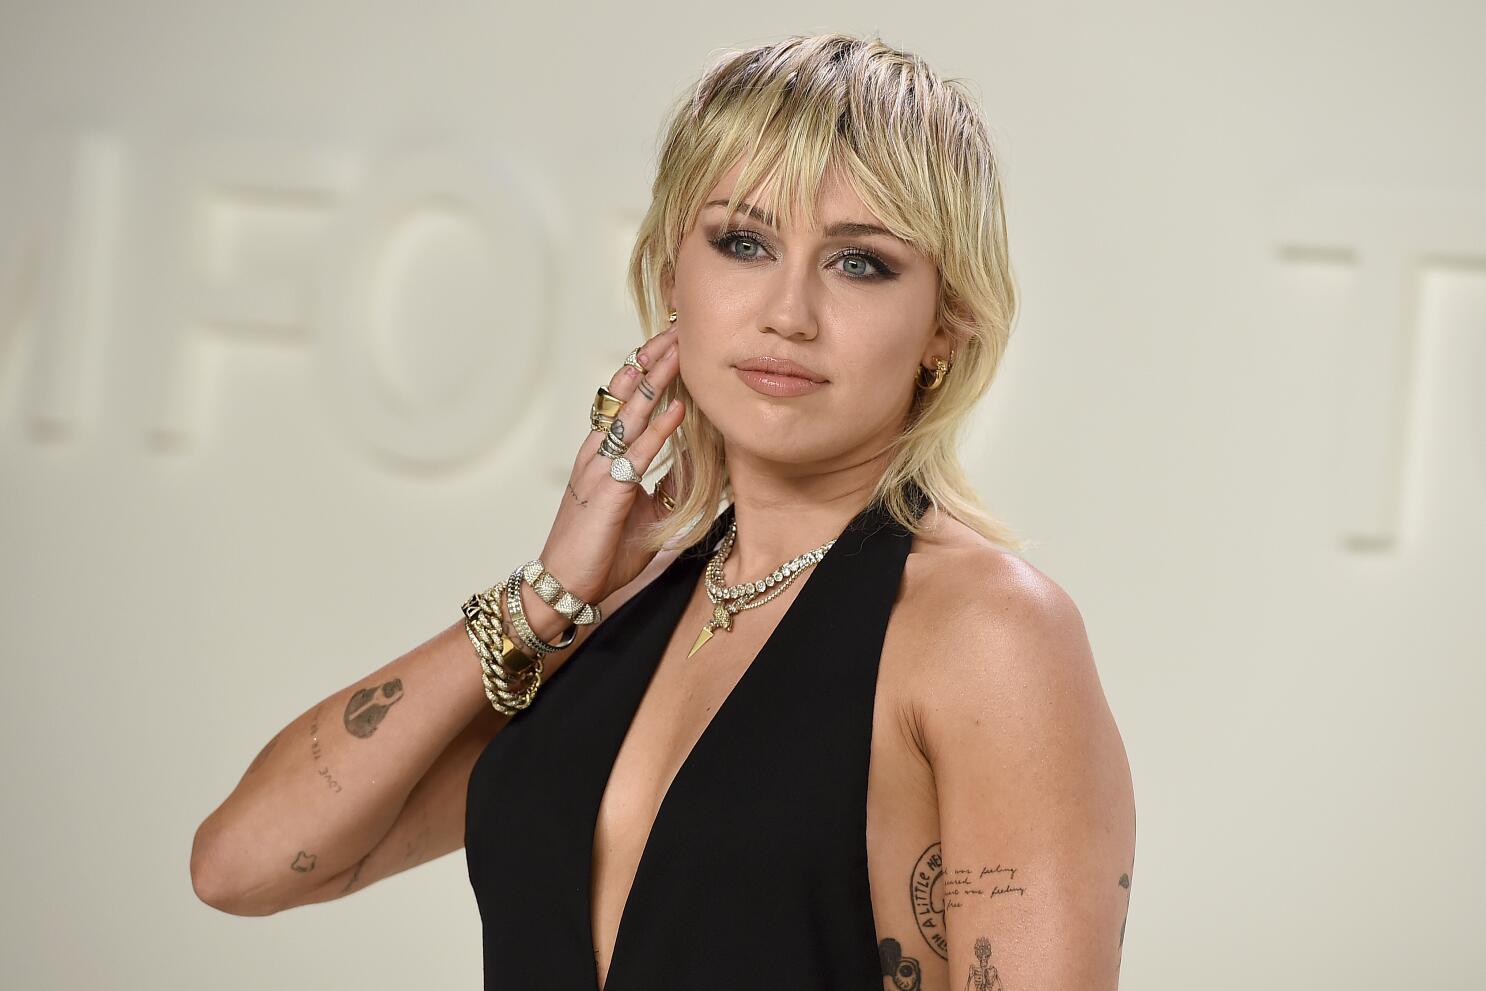 Miley Cyrus opens up about sobriety journey and relapse - Los Angeles Times